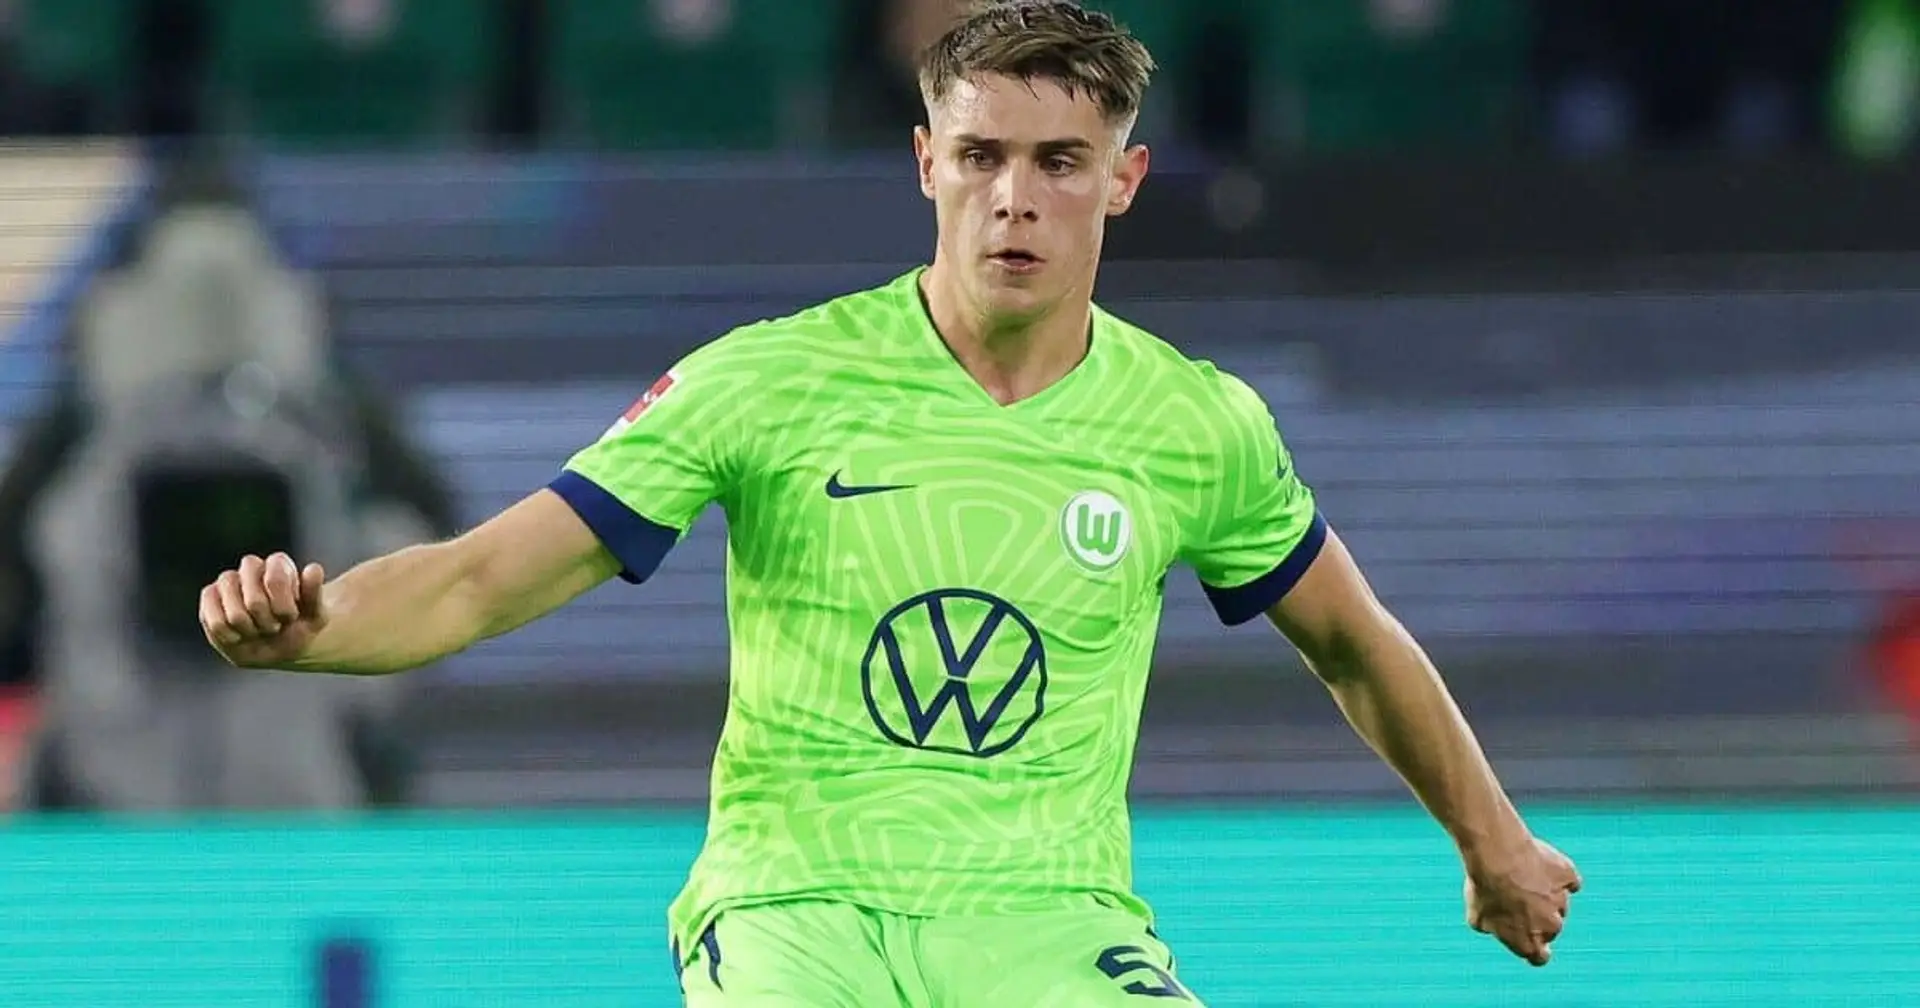 'Would be stupid to say he will definitely stay at Wolfsburg': Van de Ven's agent drops transfer hint